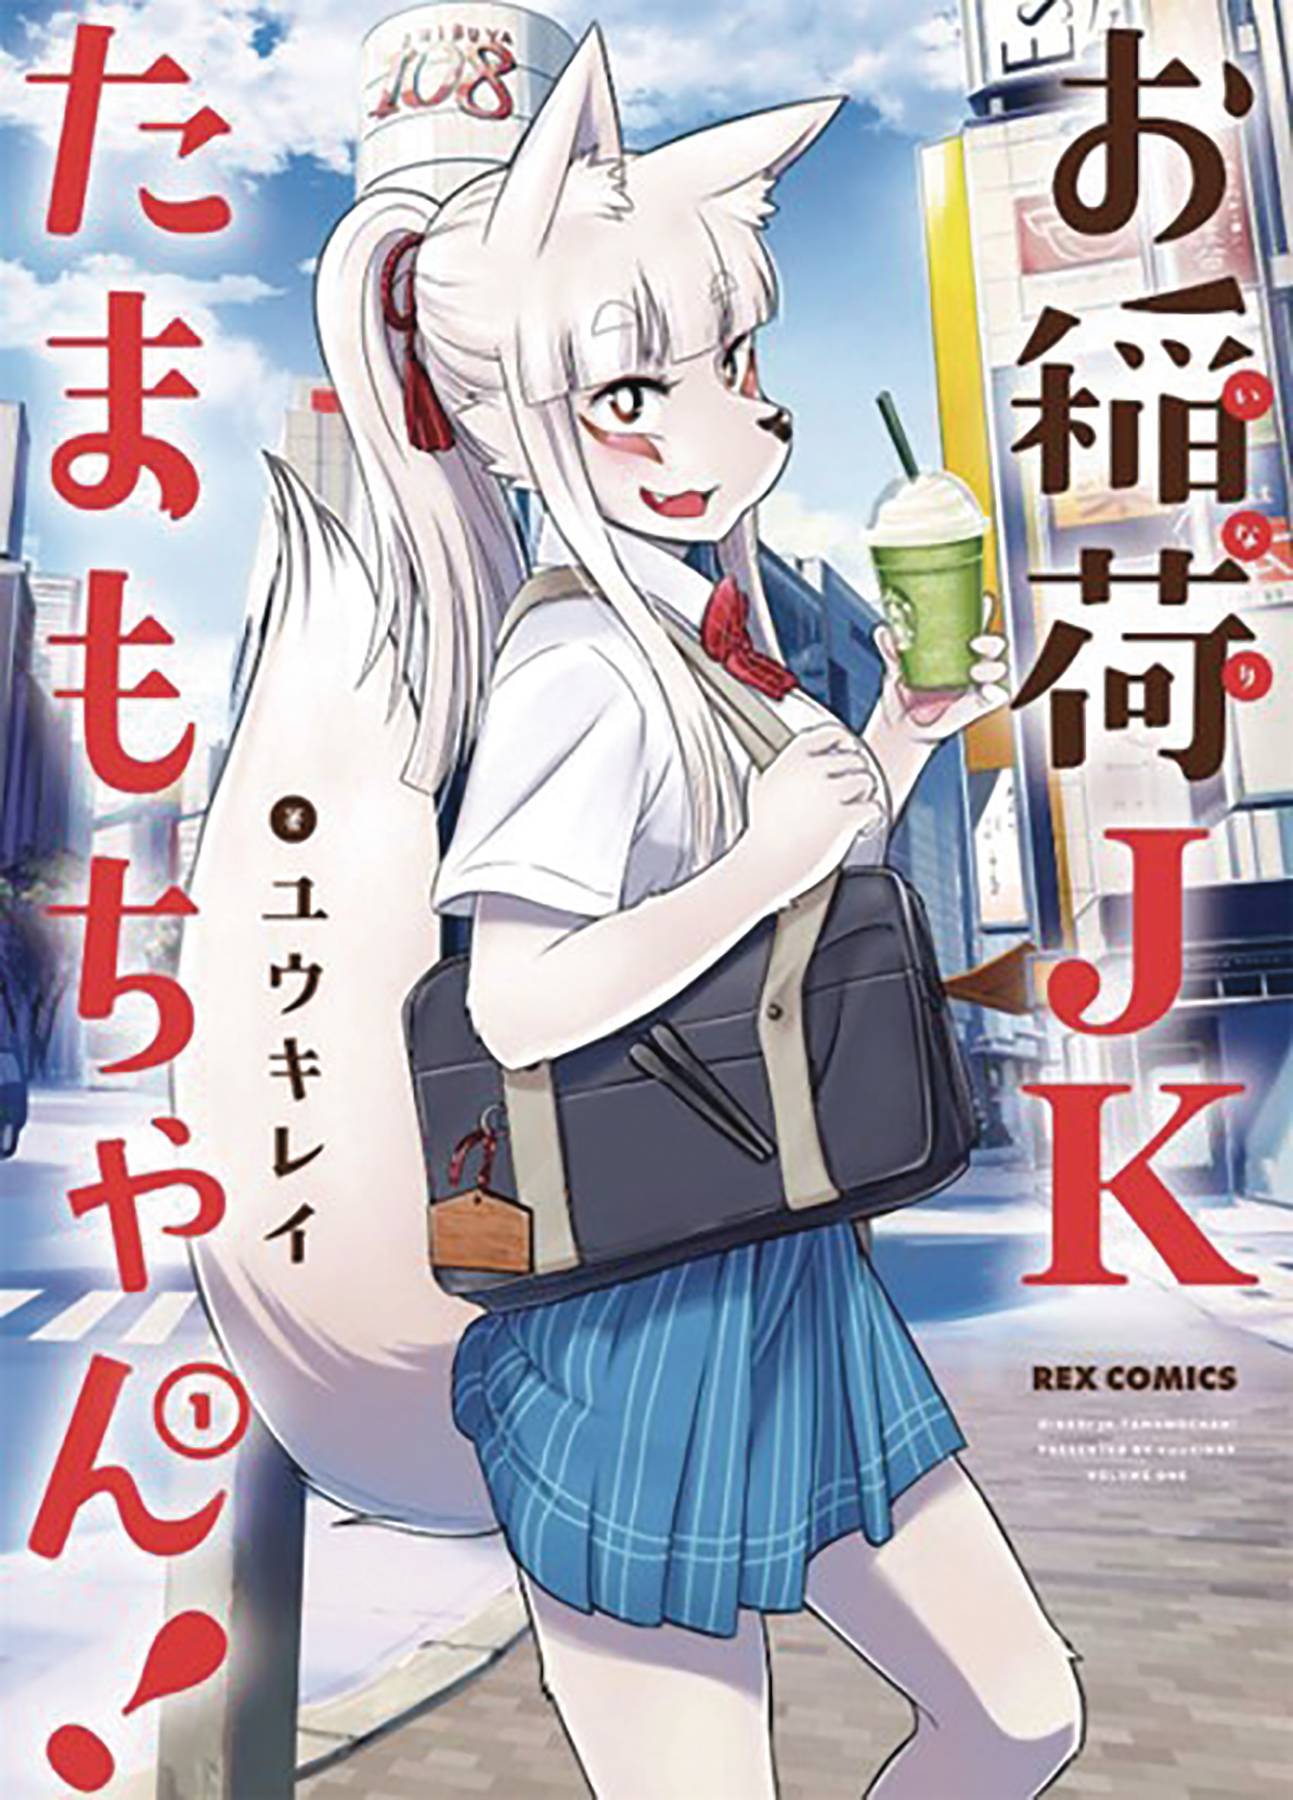 A humanoid fox with white shoulderlength hair in a ponytail and white ears and tail stands casually in the street, wearing a school uniform. She has a laptop bag slung over her shoulder and is holding a green Starbucks smoothie in one hand, smiling. 